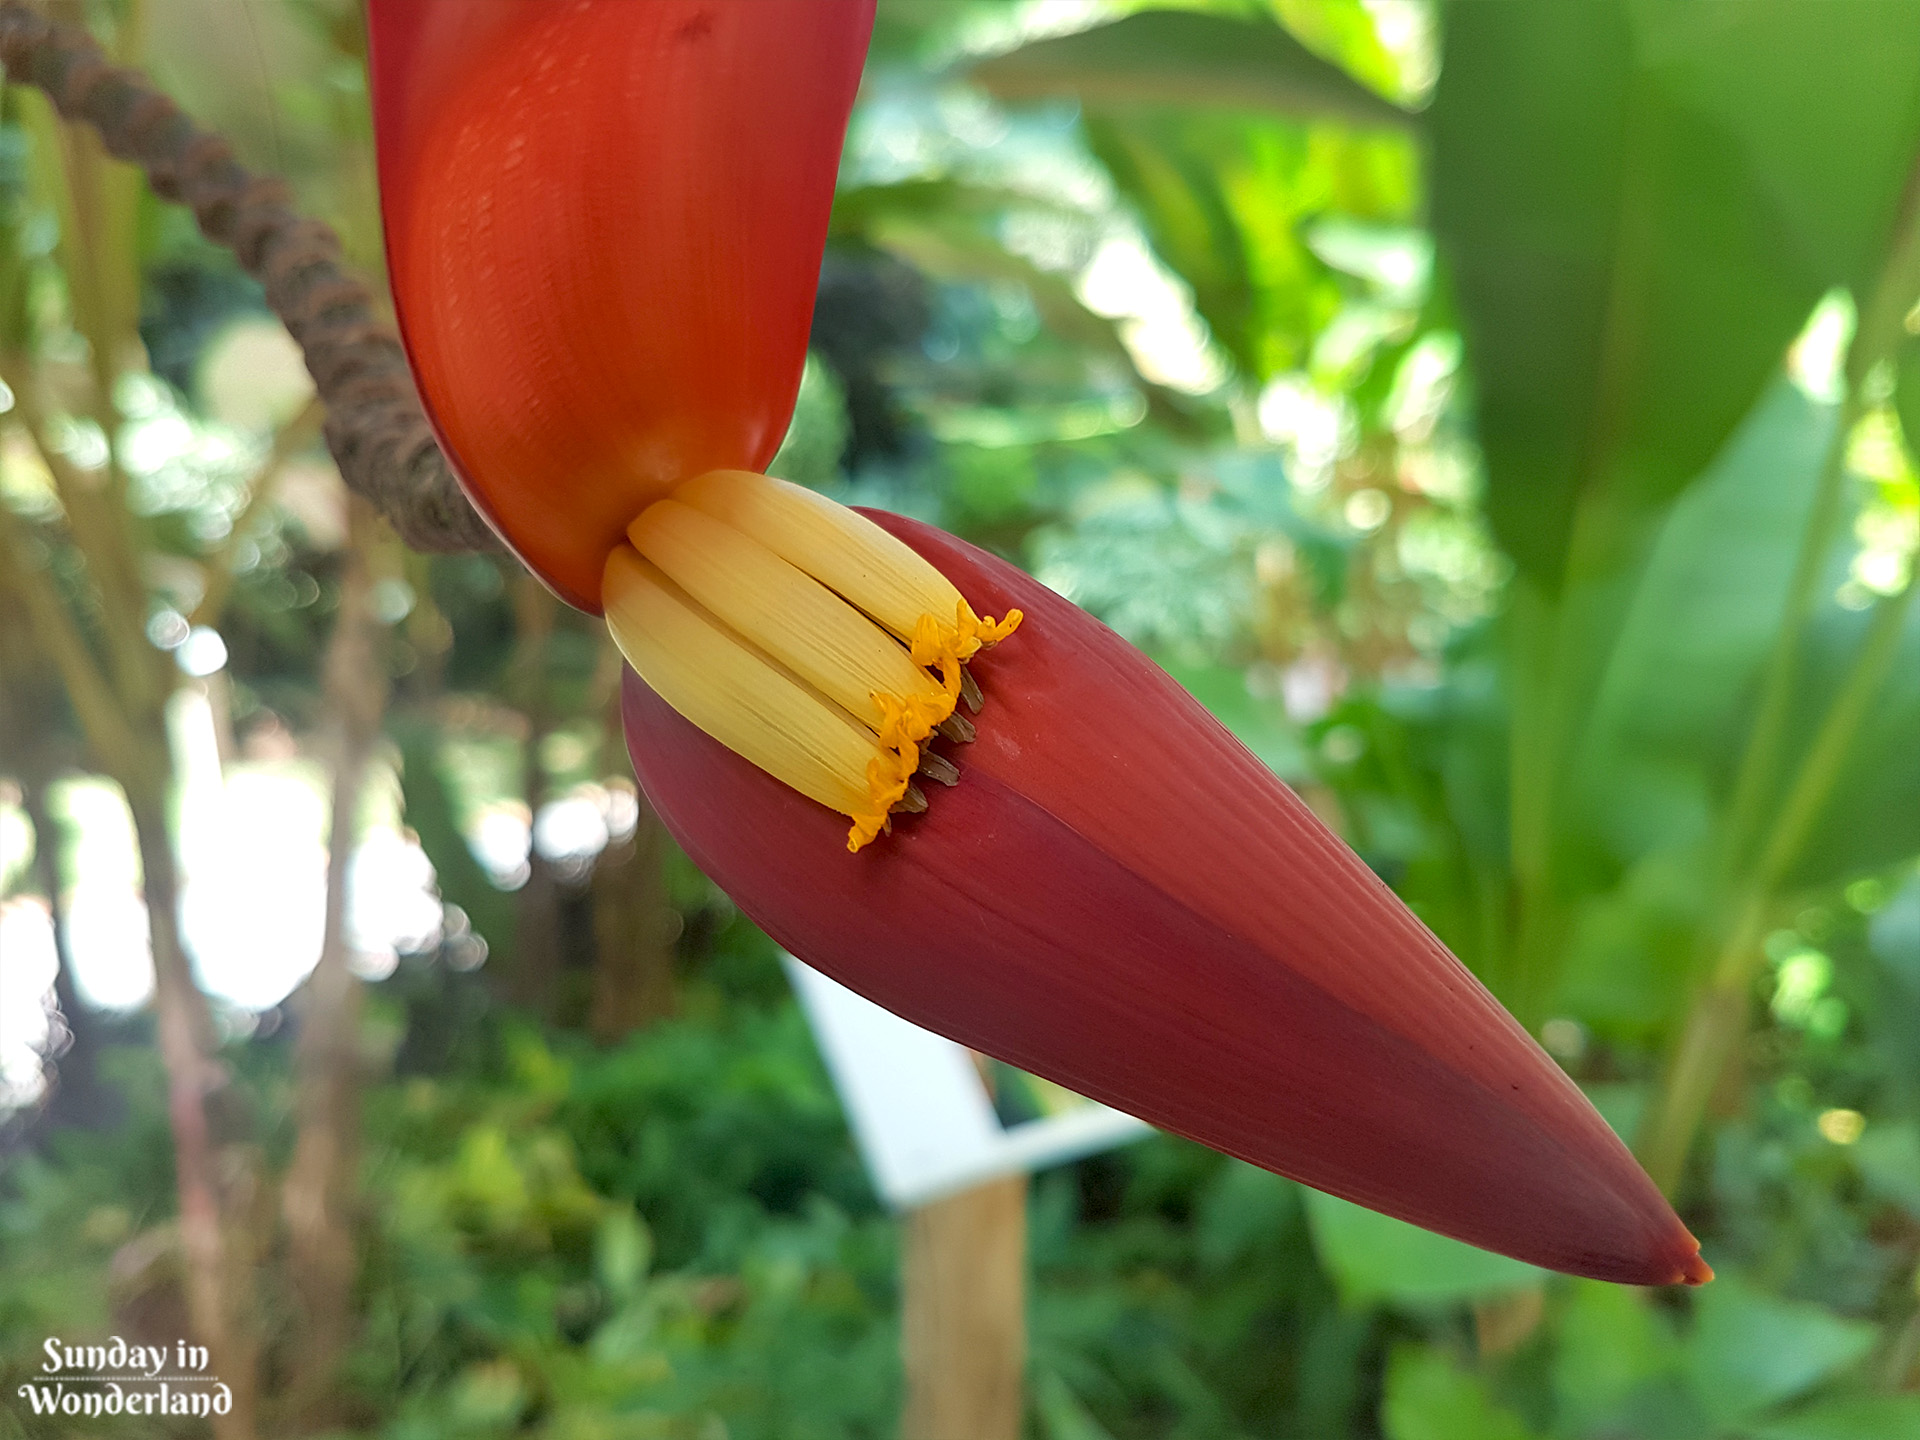 A strange but beautiful red flower in Botanical Garden in Deshaies in Guadeloupe - Sunday in Wonderland Blog